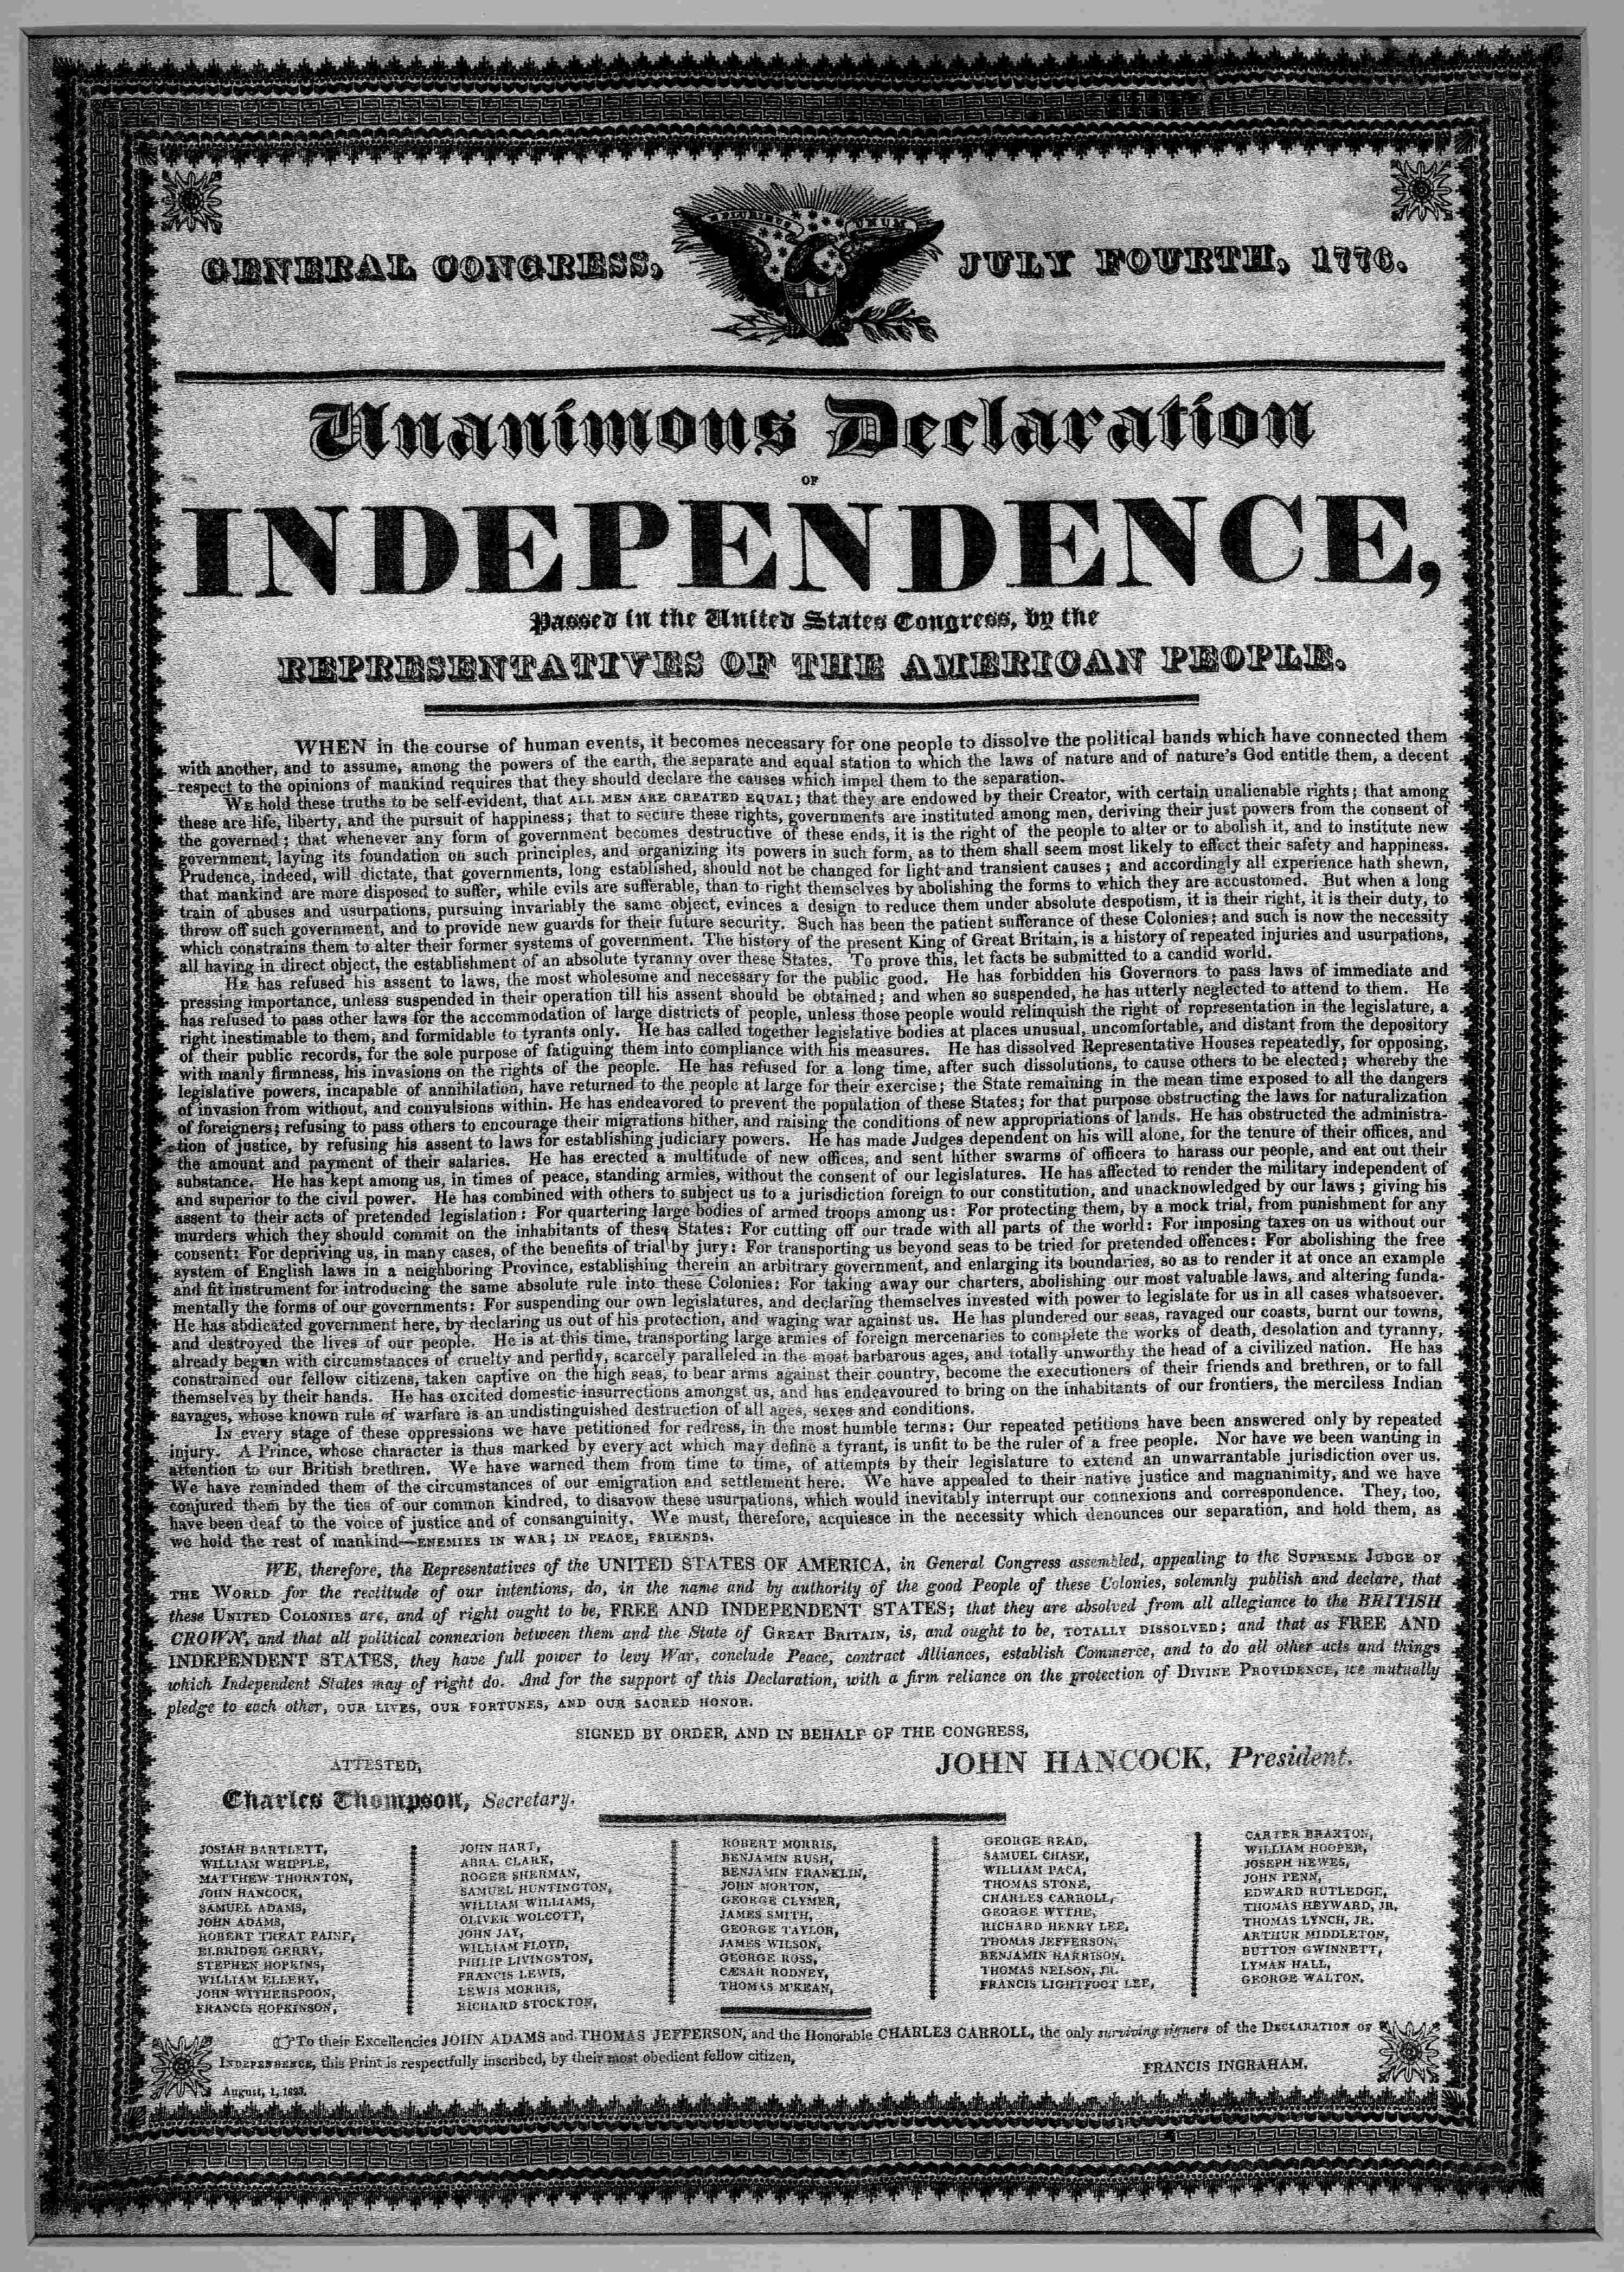 declaration of independence text